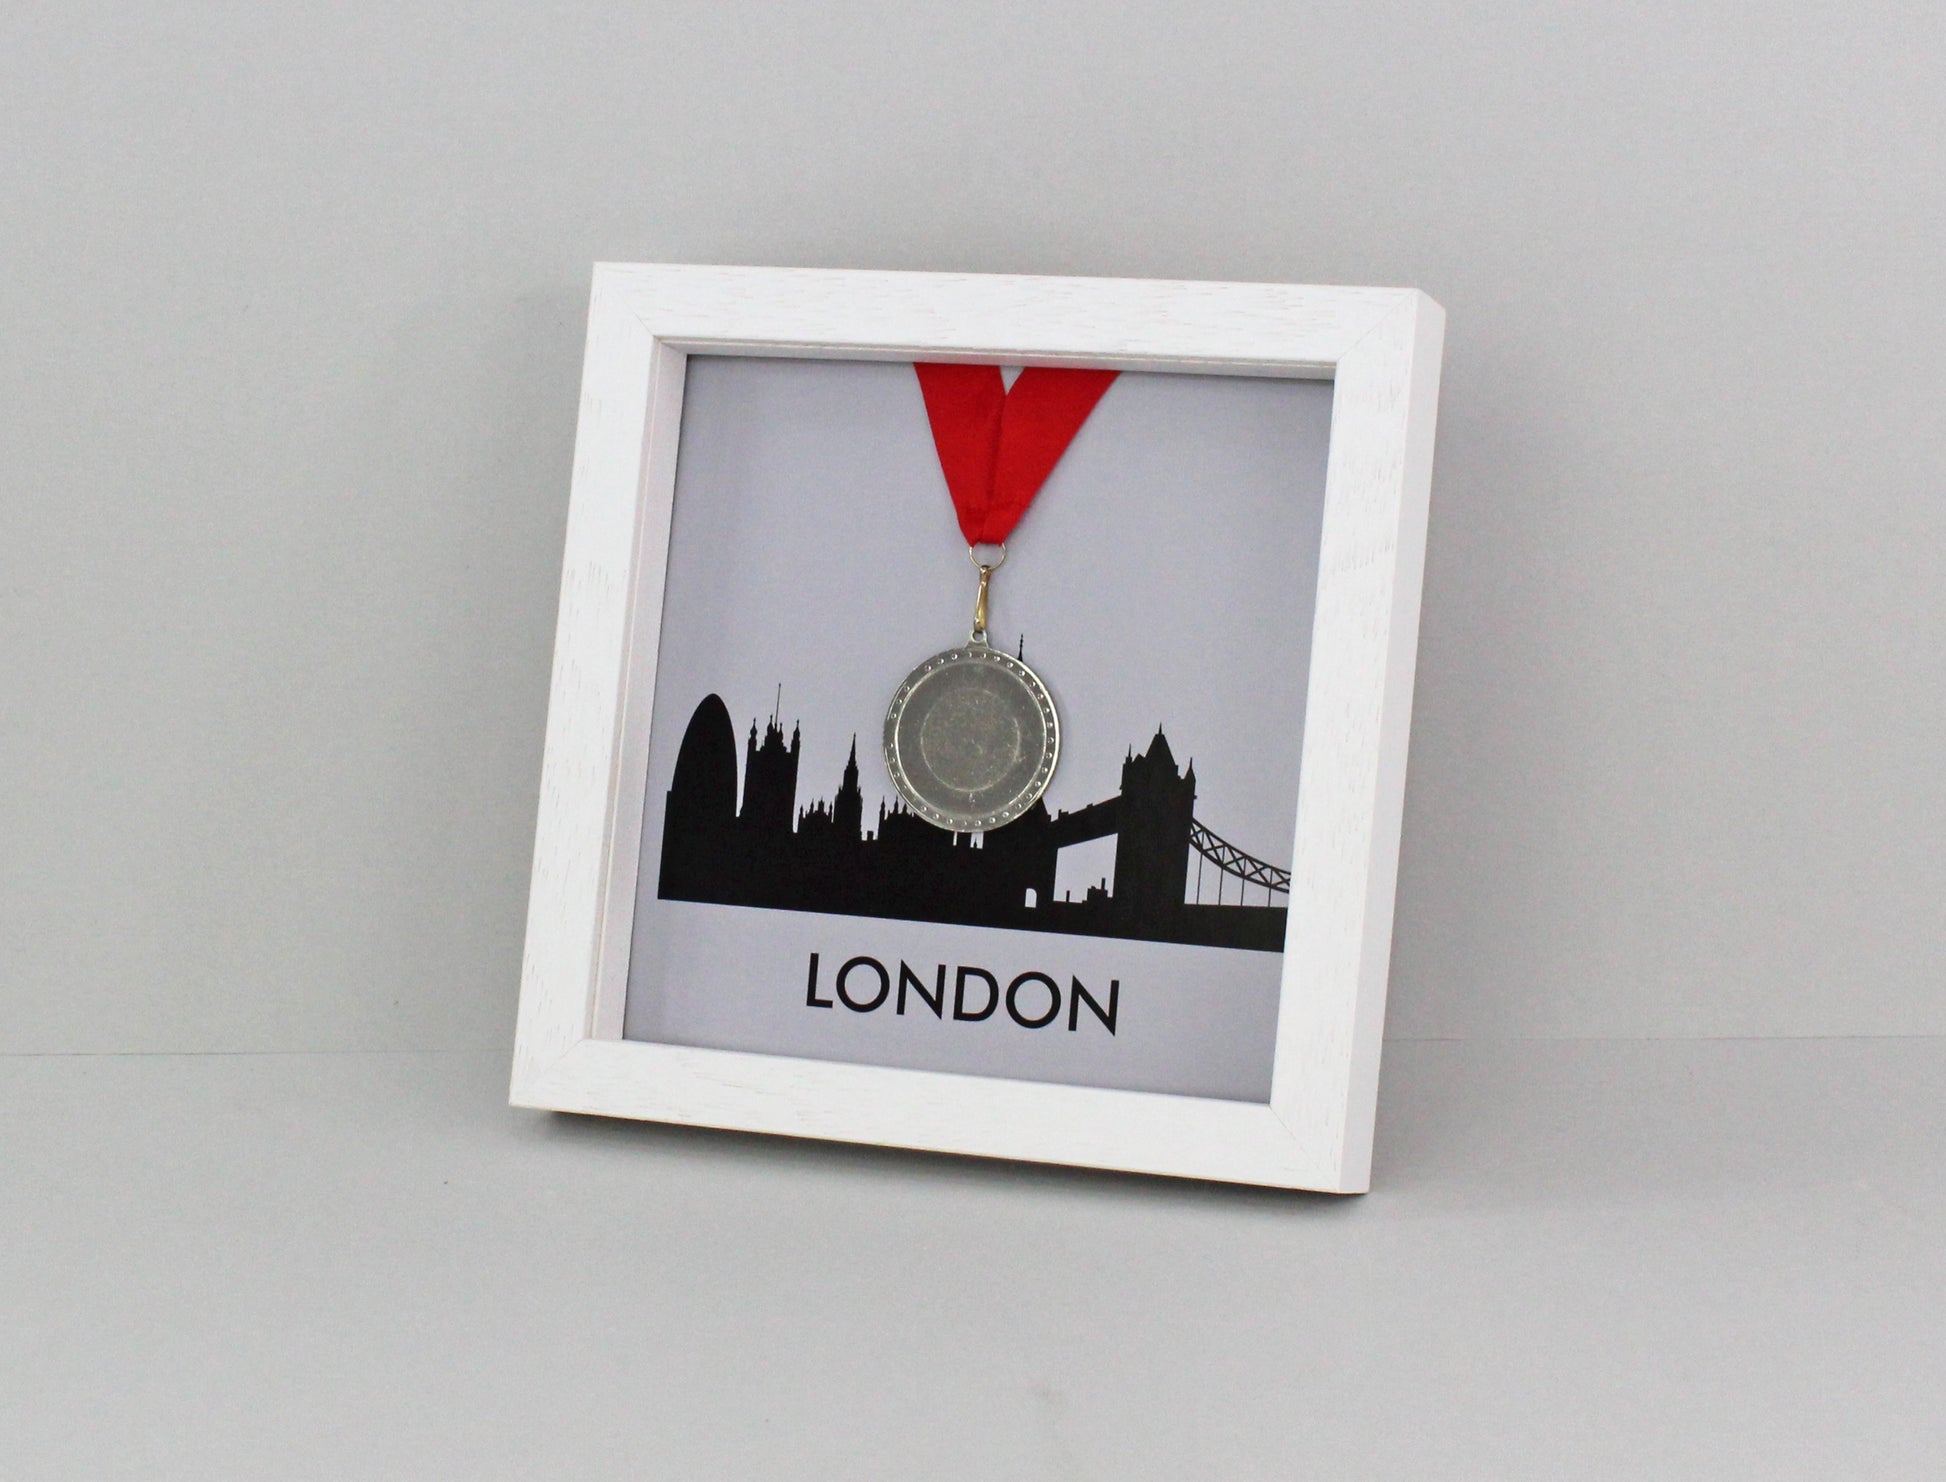 Medal Display frame for one Medal - London/Berlin/Paris/Chicago/New York and more. Perfect way to display your achievements! - PhotoFramesandMore - Wooden Picture Frames